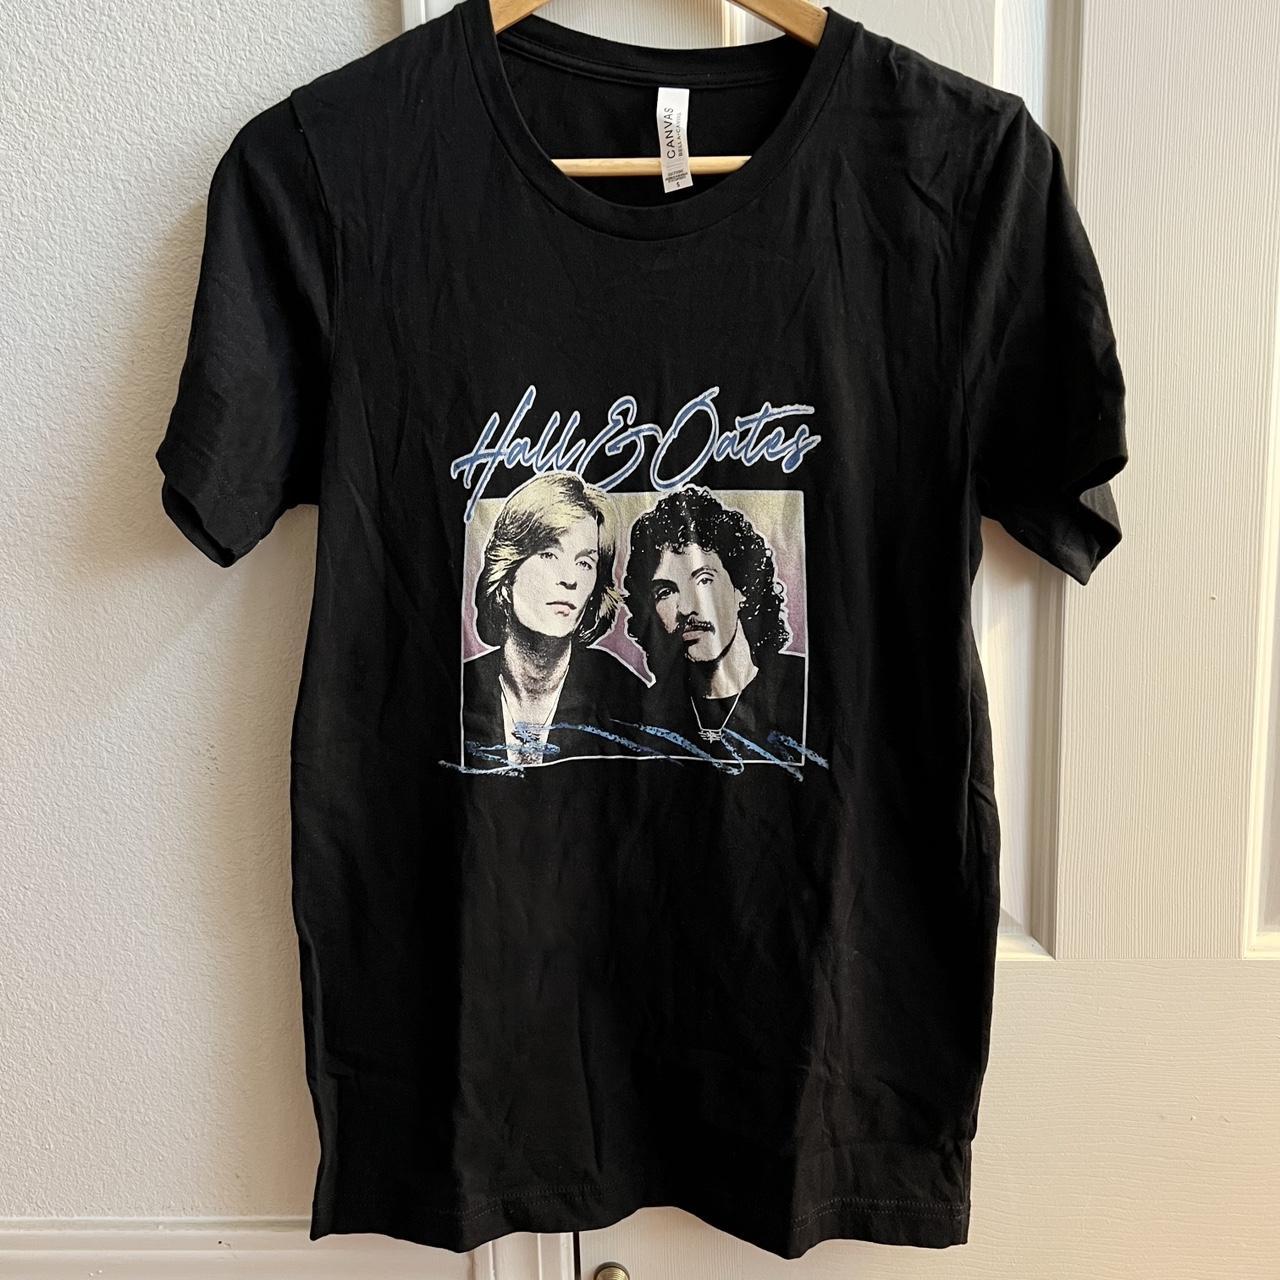 hall & oates graphic band tee 🎸🎶 size S pit to pit:... - Depop